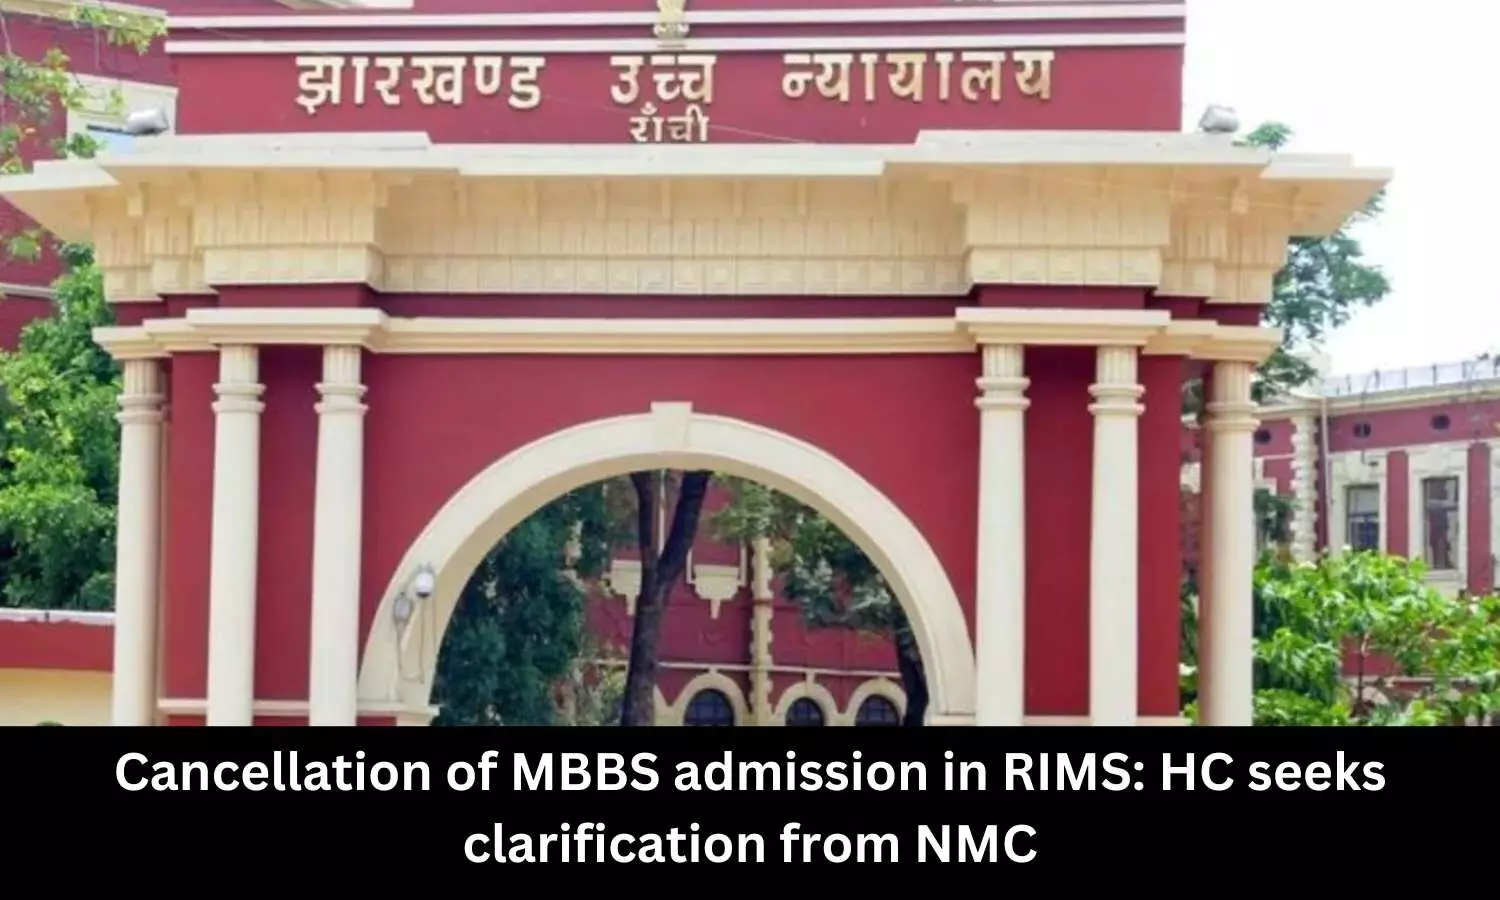 Jharkhand HC seeks clarification from NMC regarding MBBS admission cancellation in RIMS